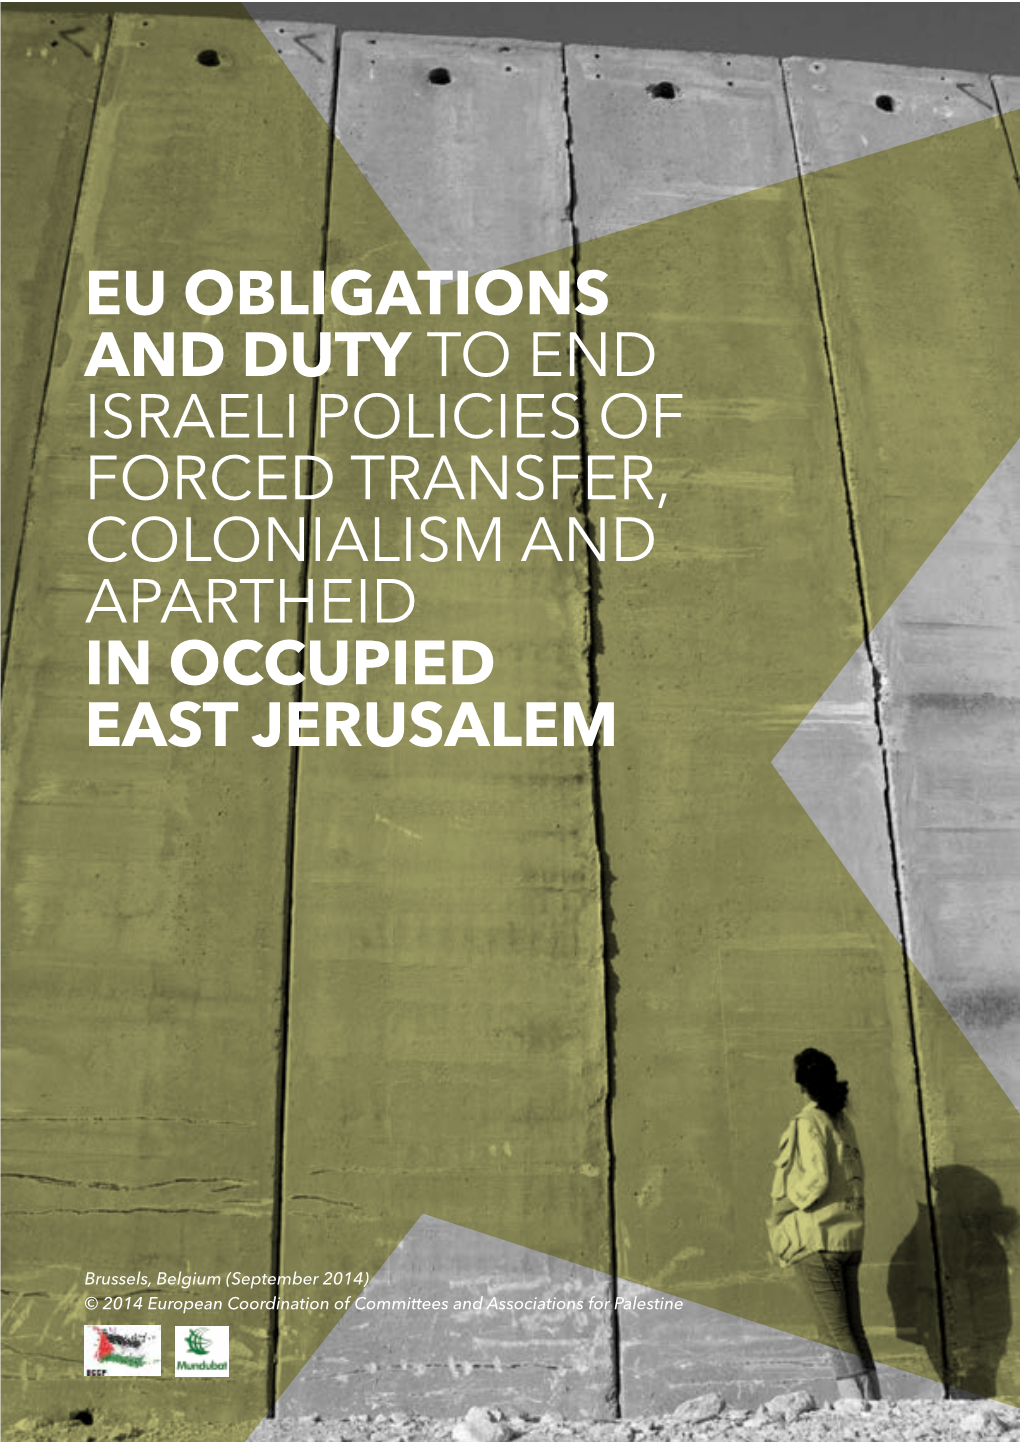 Eu Obligations and Duty to End Israeli Policies of Forced Transfer, Colonialism and Apartheid in Occupied East Jerusalem